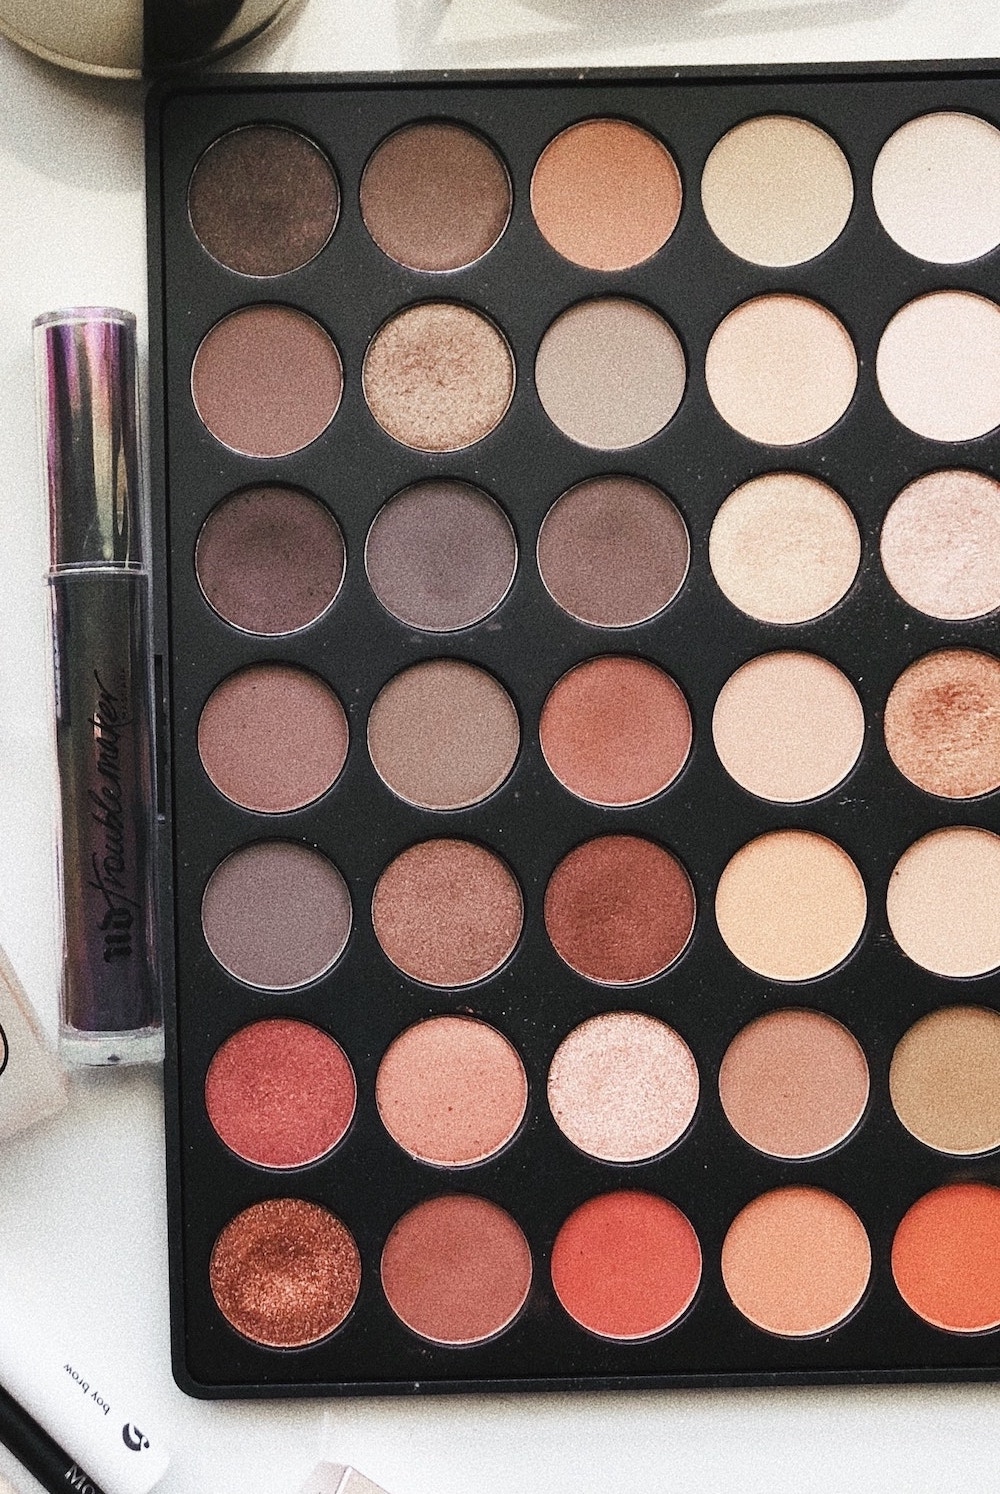 How to Build Your Perfect Makeup Collection on a Budget